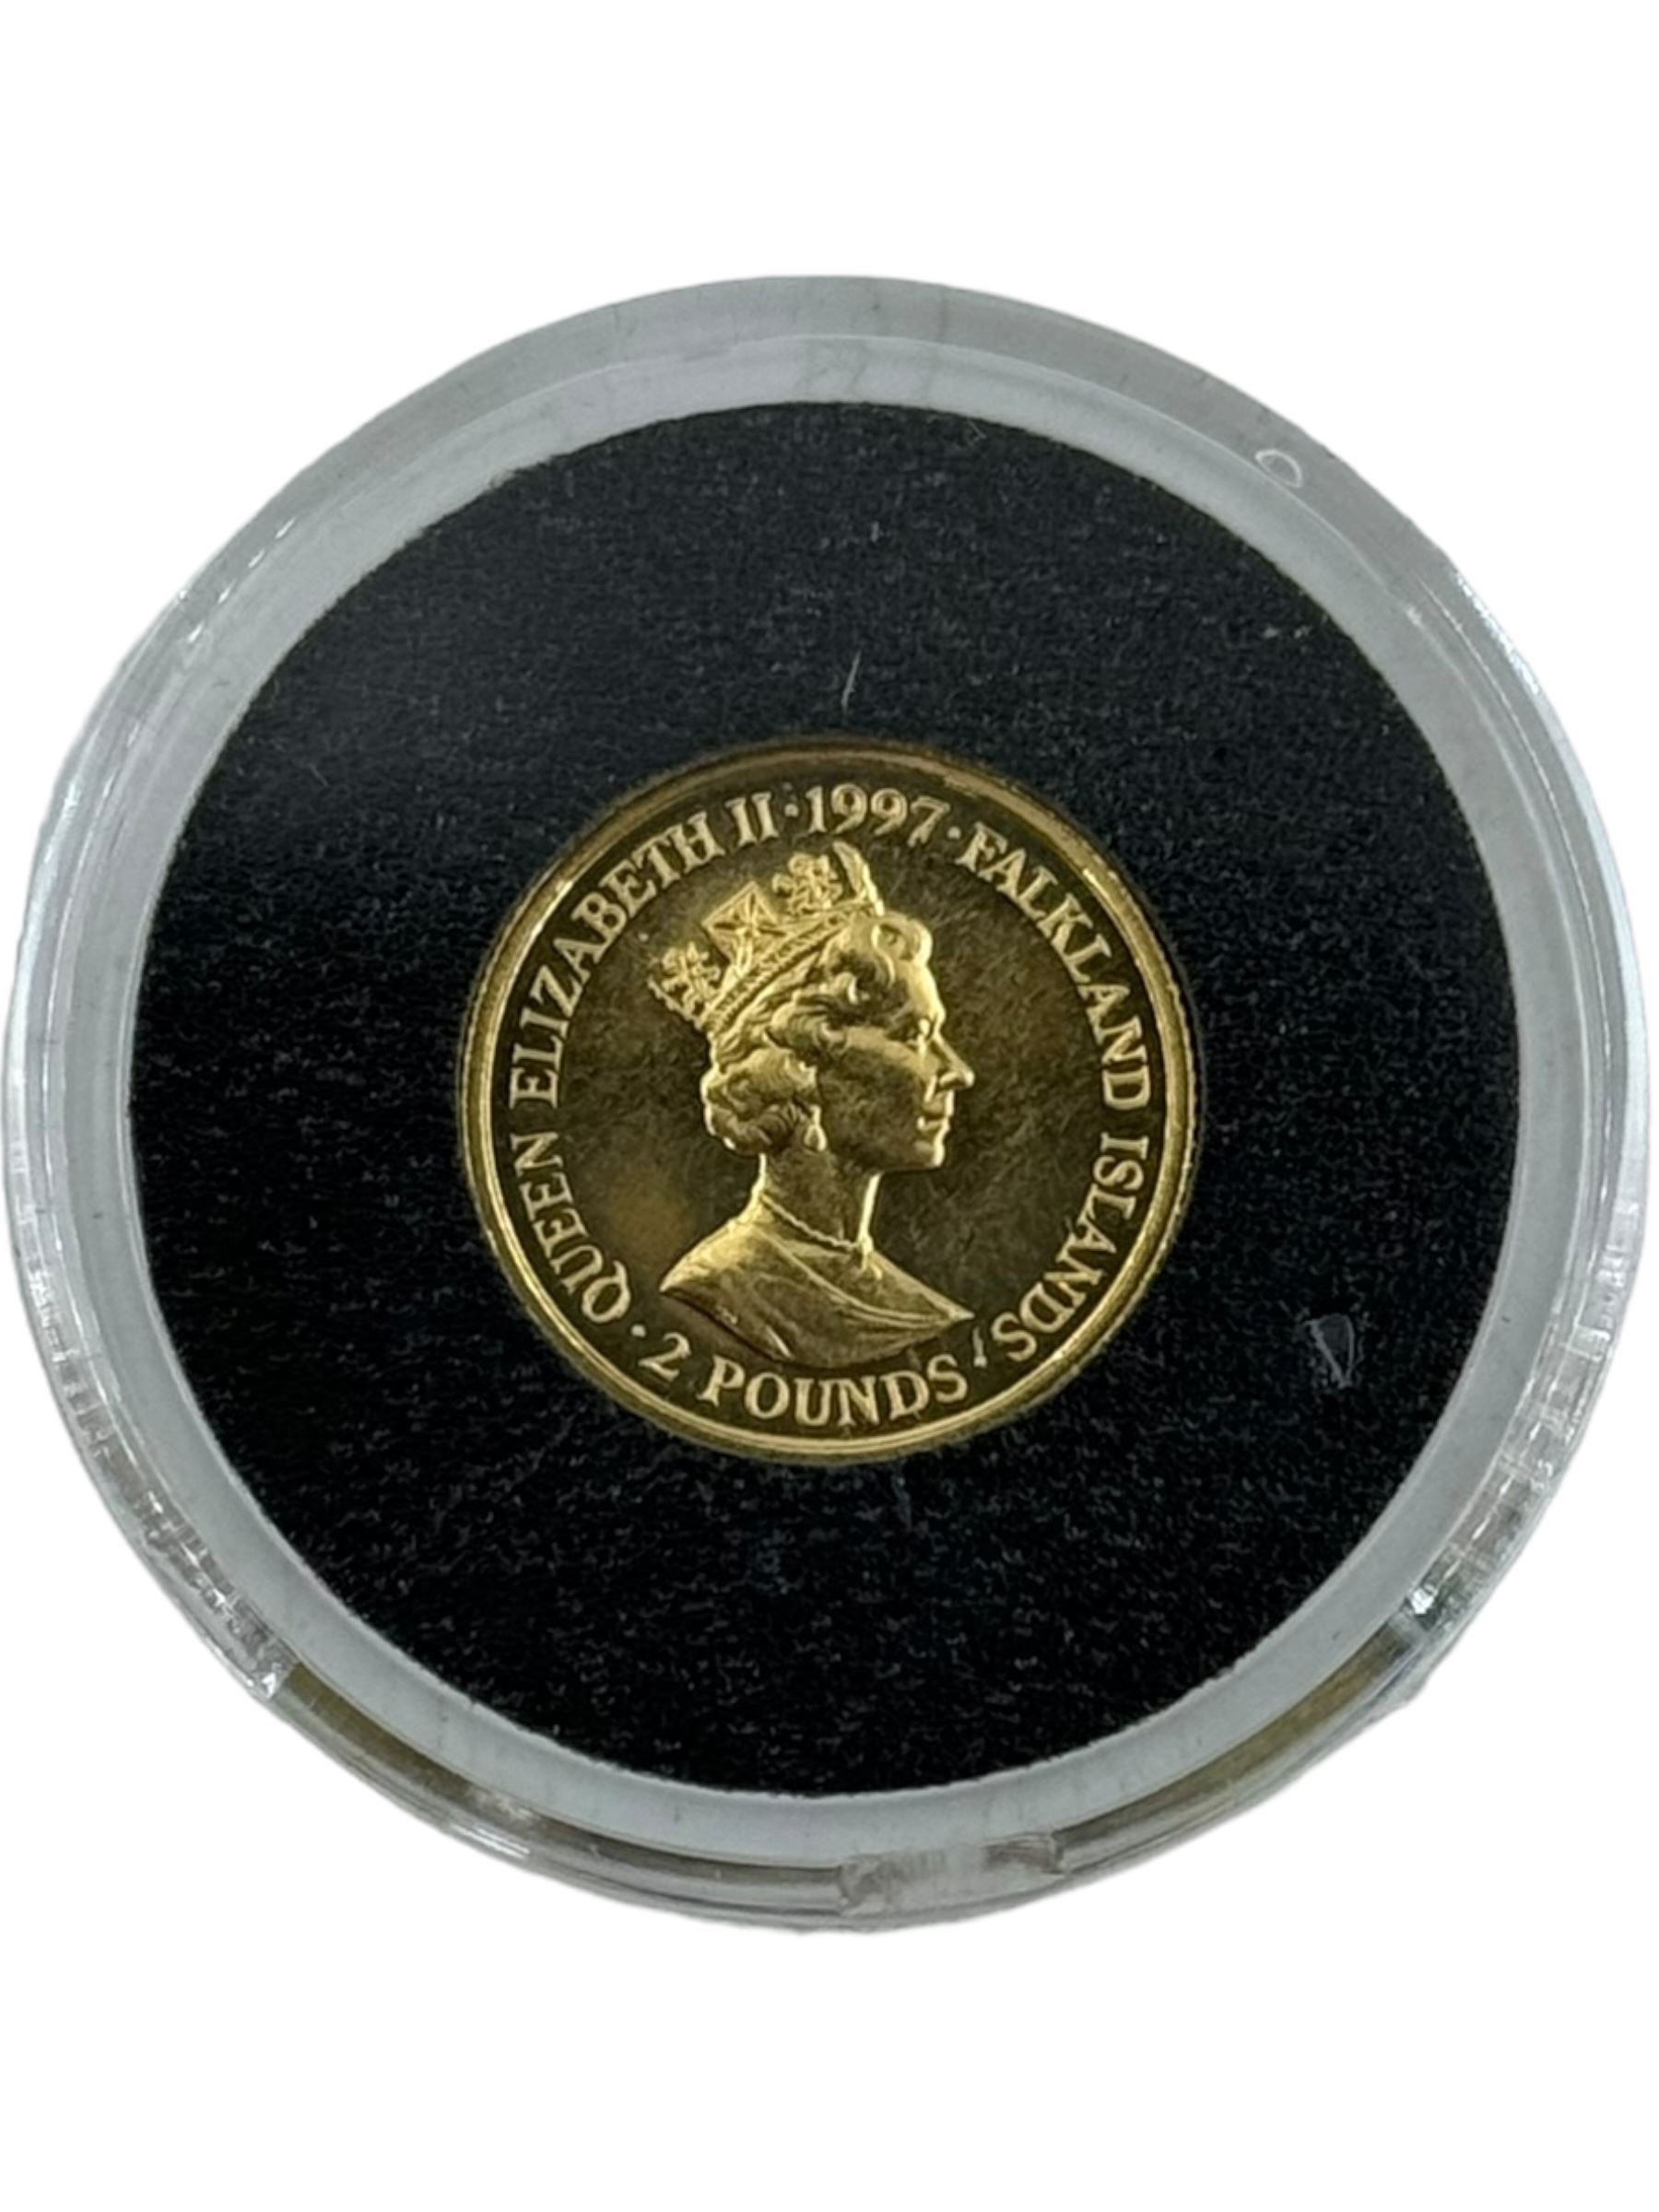 Four one twenty-fifth of an ounce 24 carat gold coins - Image 2 of 9